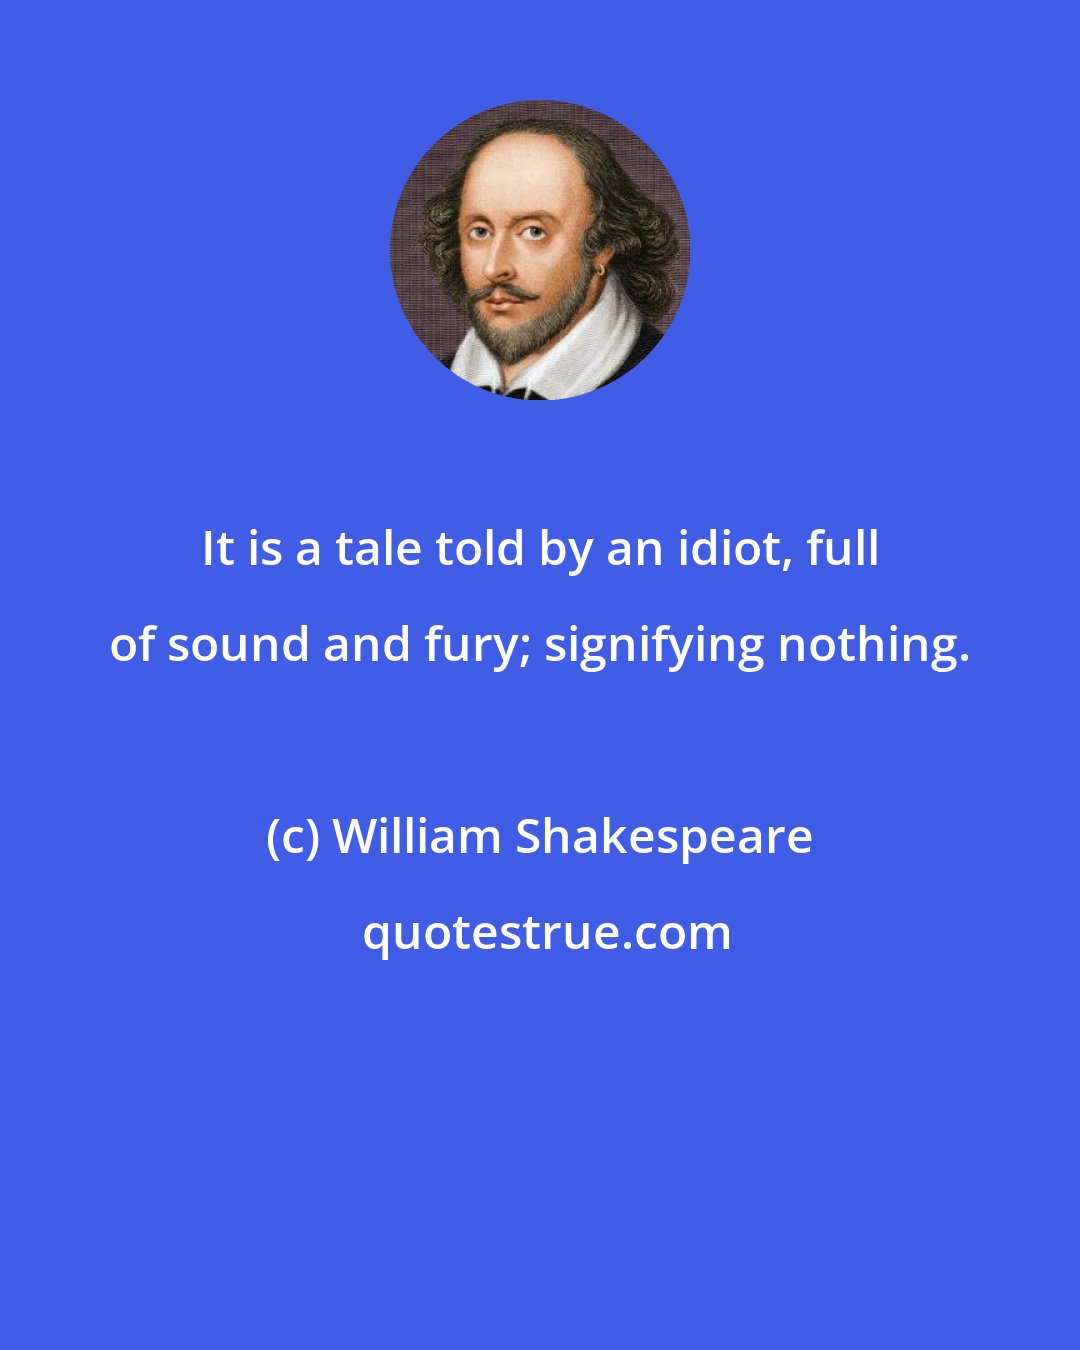 William Shakespeare: It is a tale told by an idiot, full of sound and fury; signifying nothing.